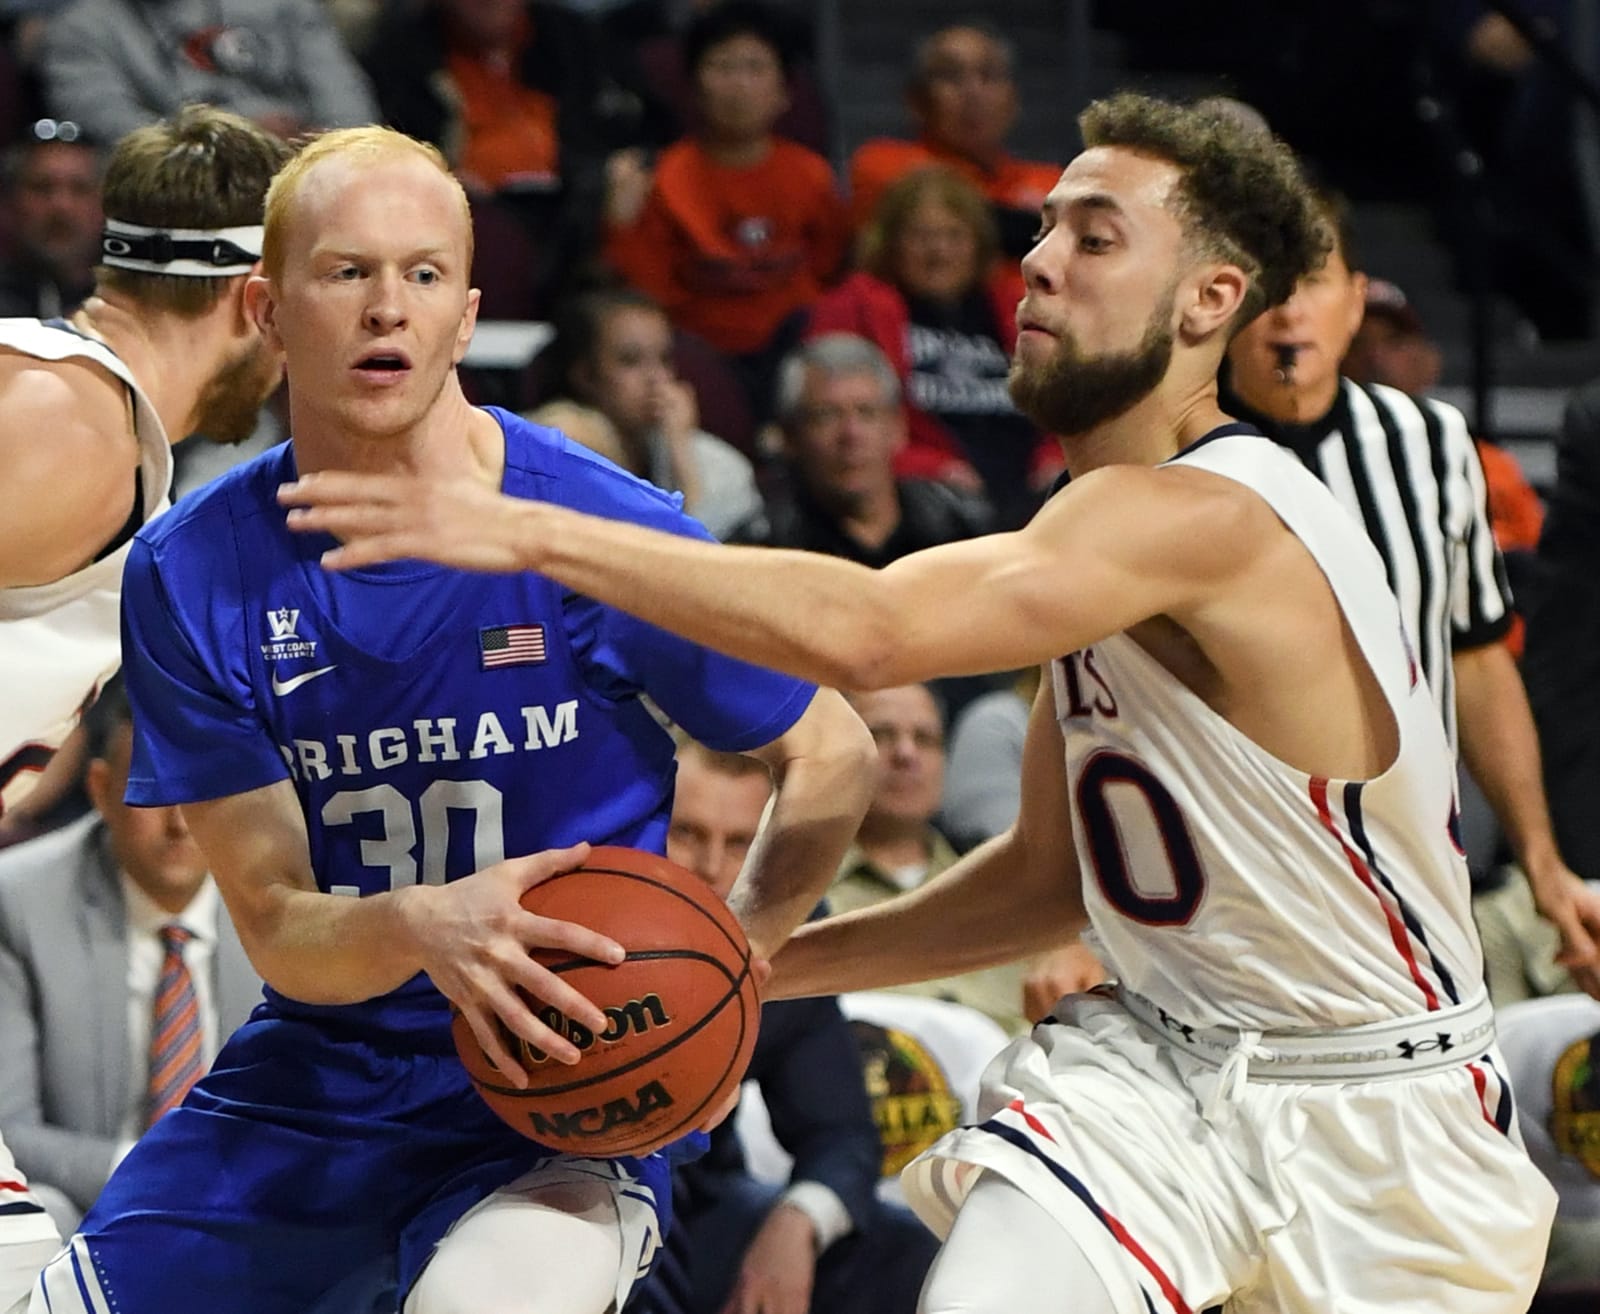 WCC Basketball 2020 conference tournament preview and predictions